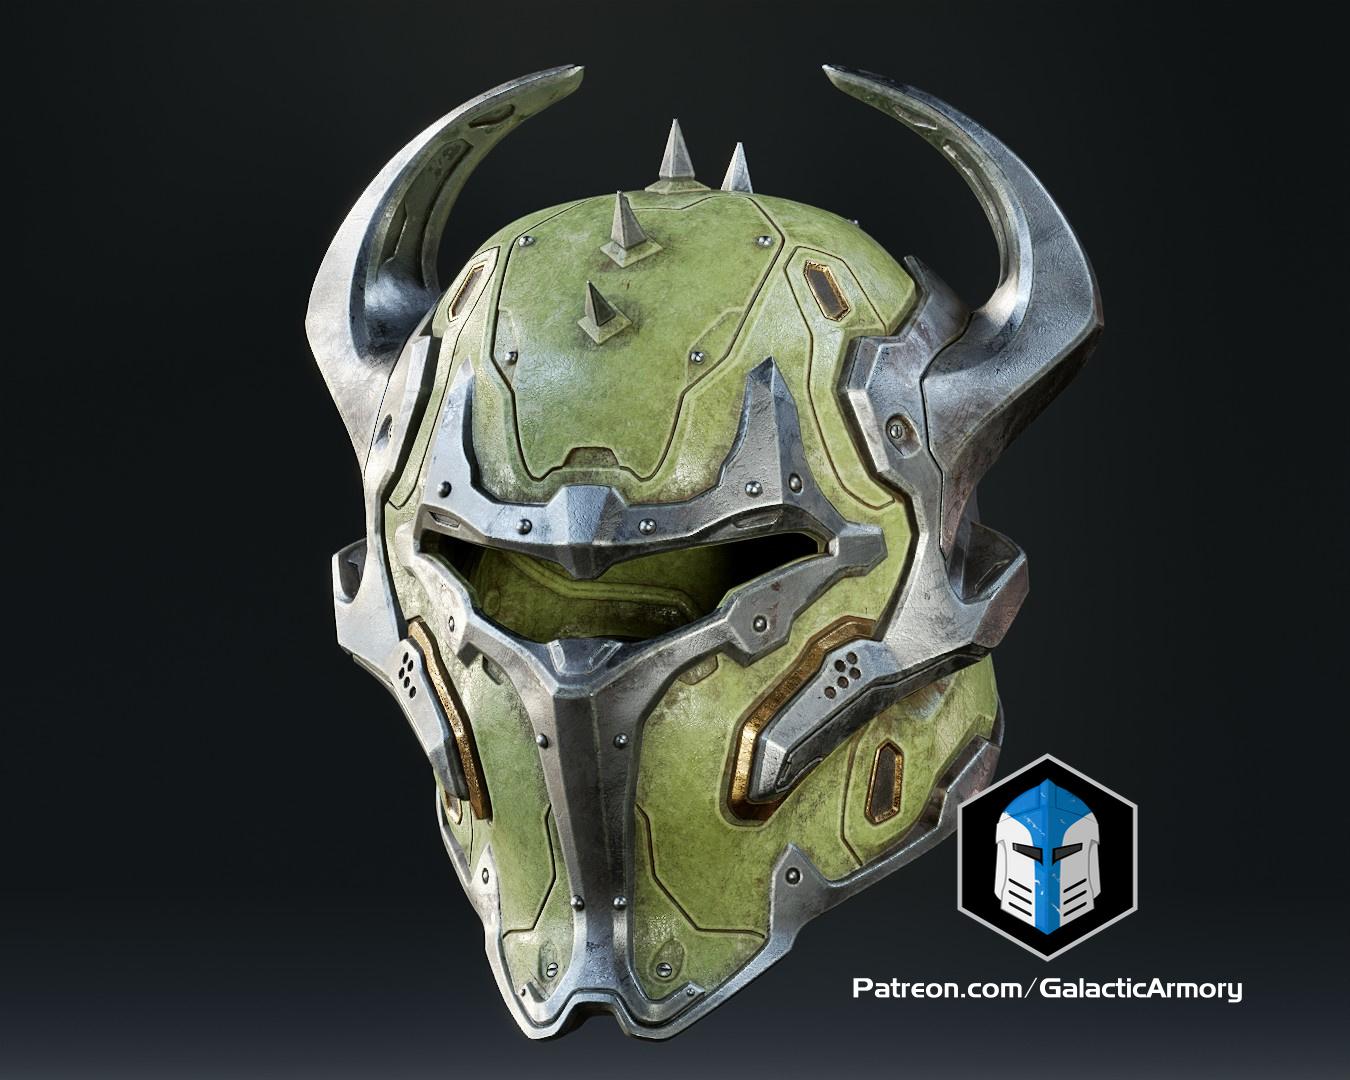 [New Files!] The Doom Sentinel helmet has been added to the Specialist rewards!